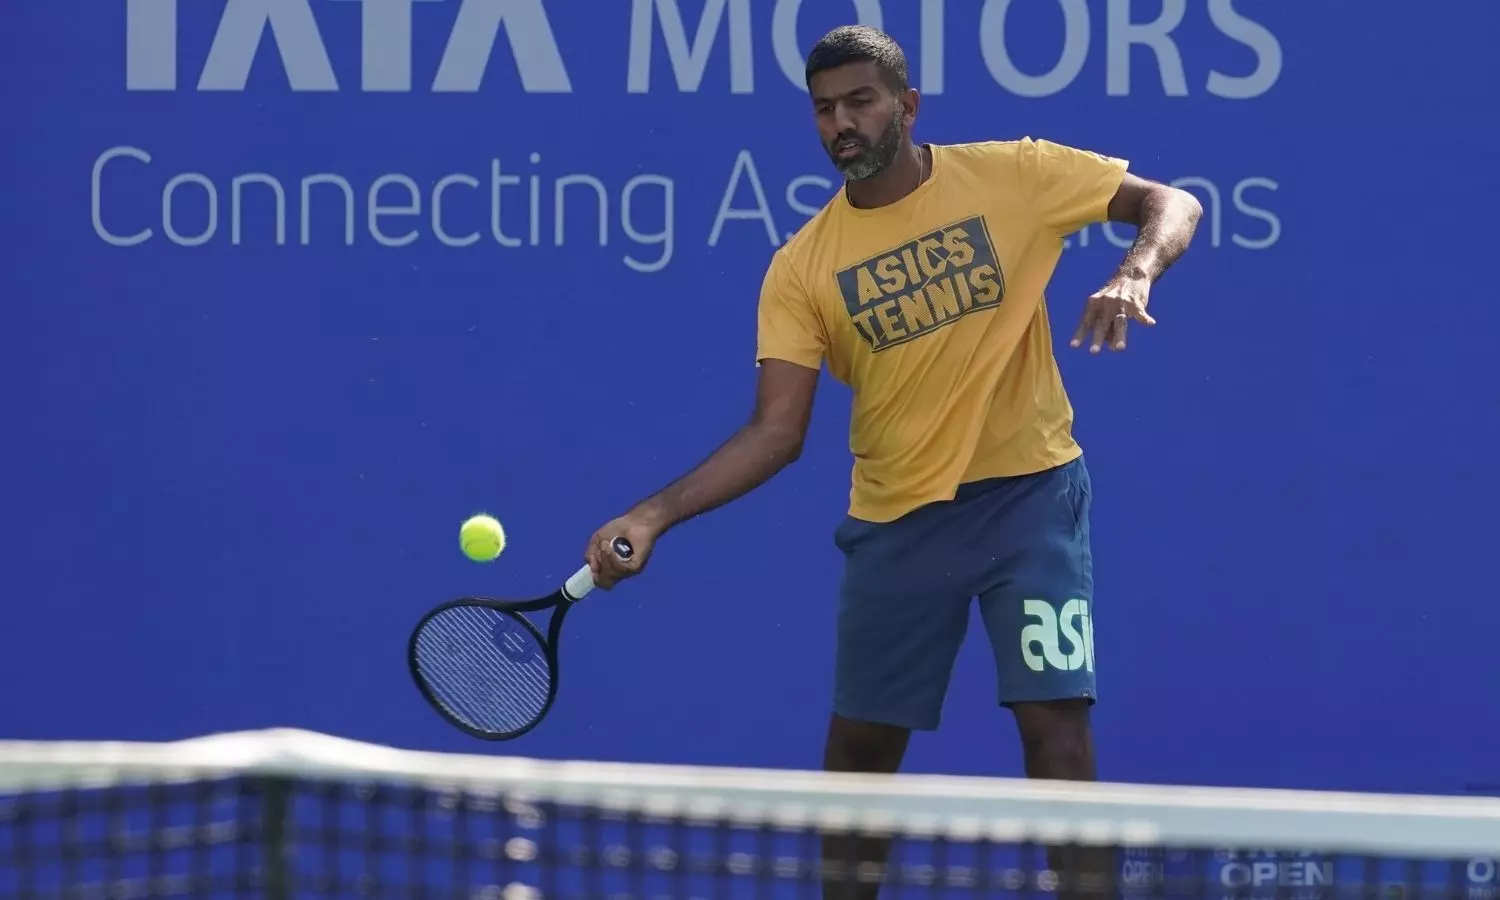 US Open 2022 Rohan Bopanna to start doubles campaign